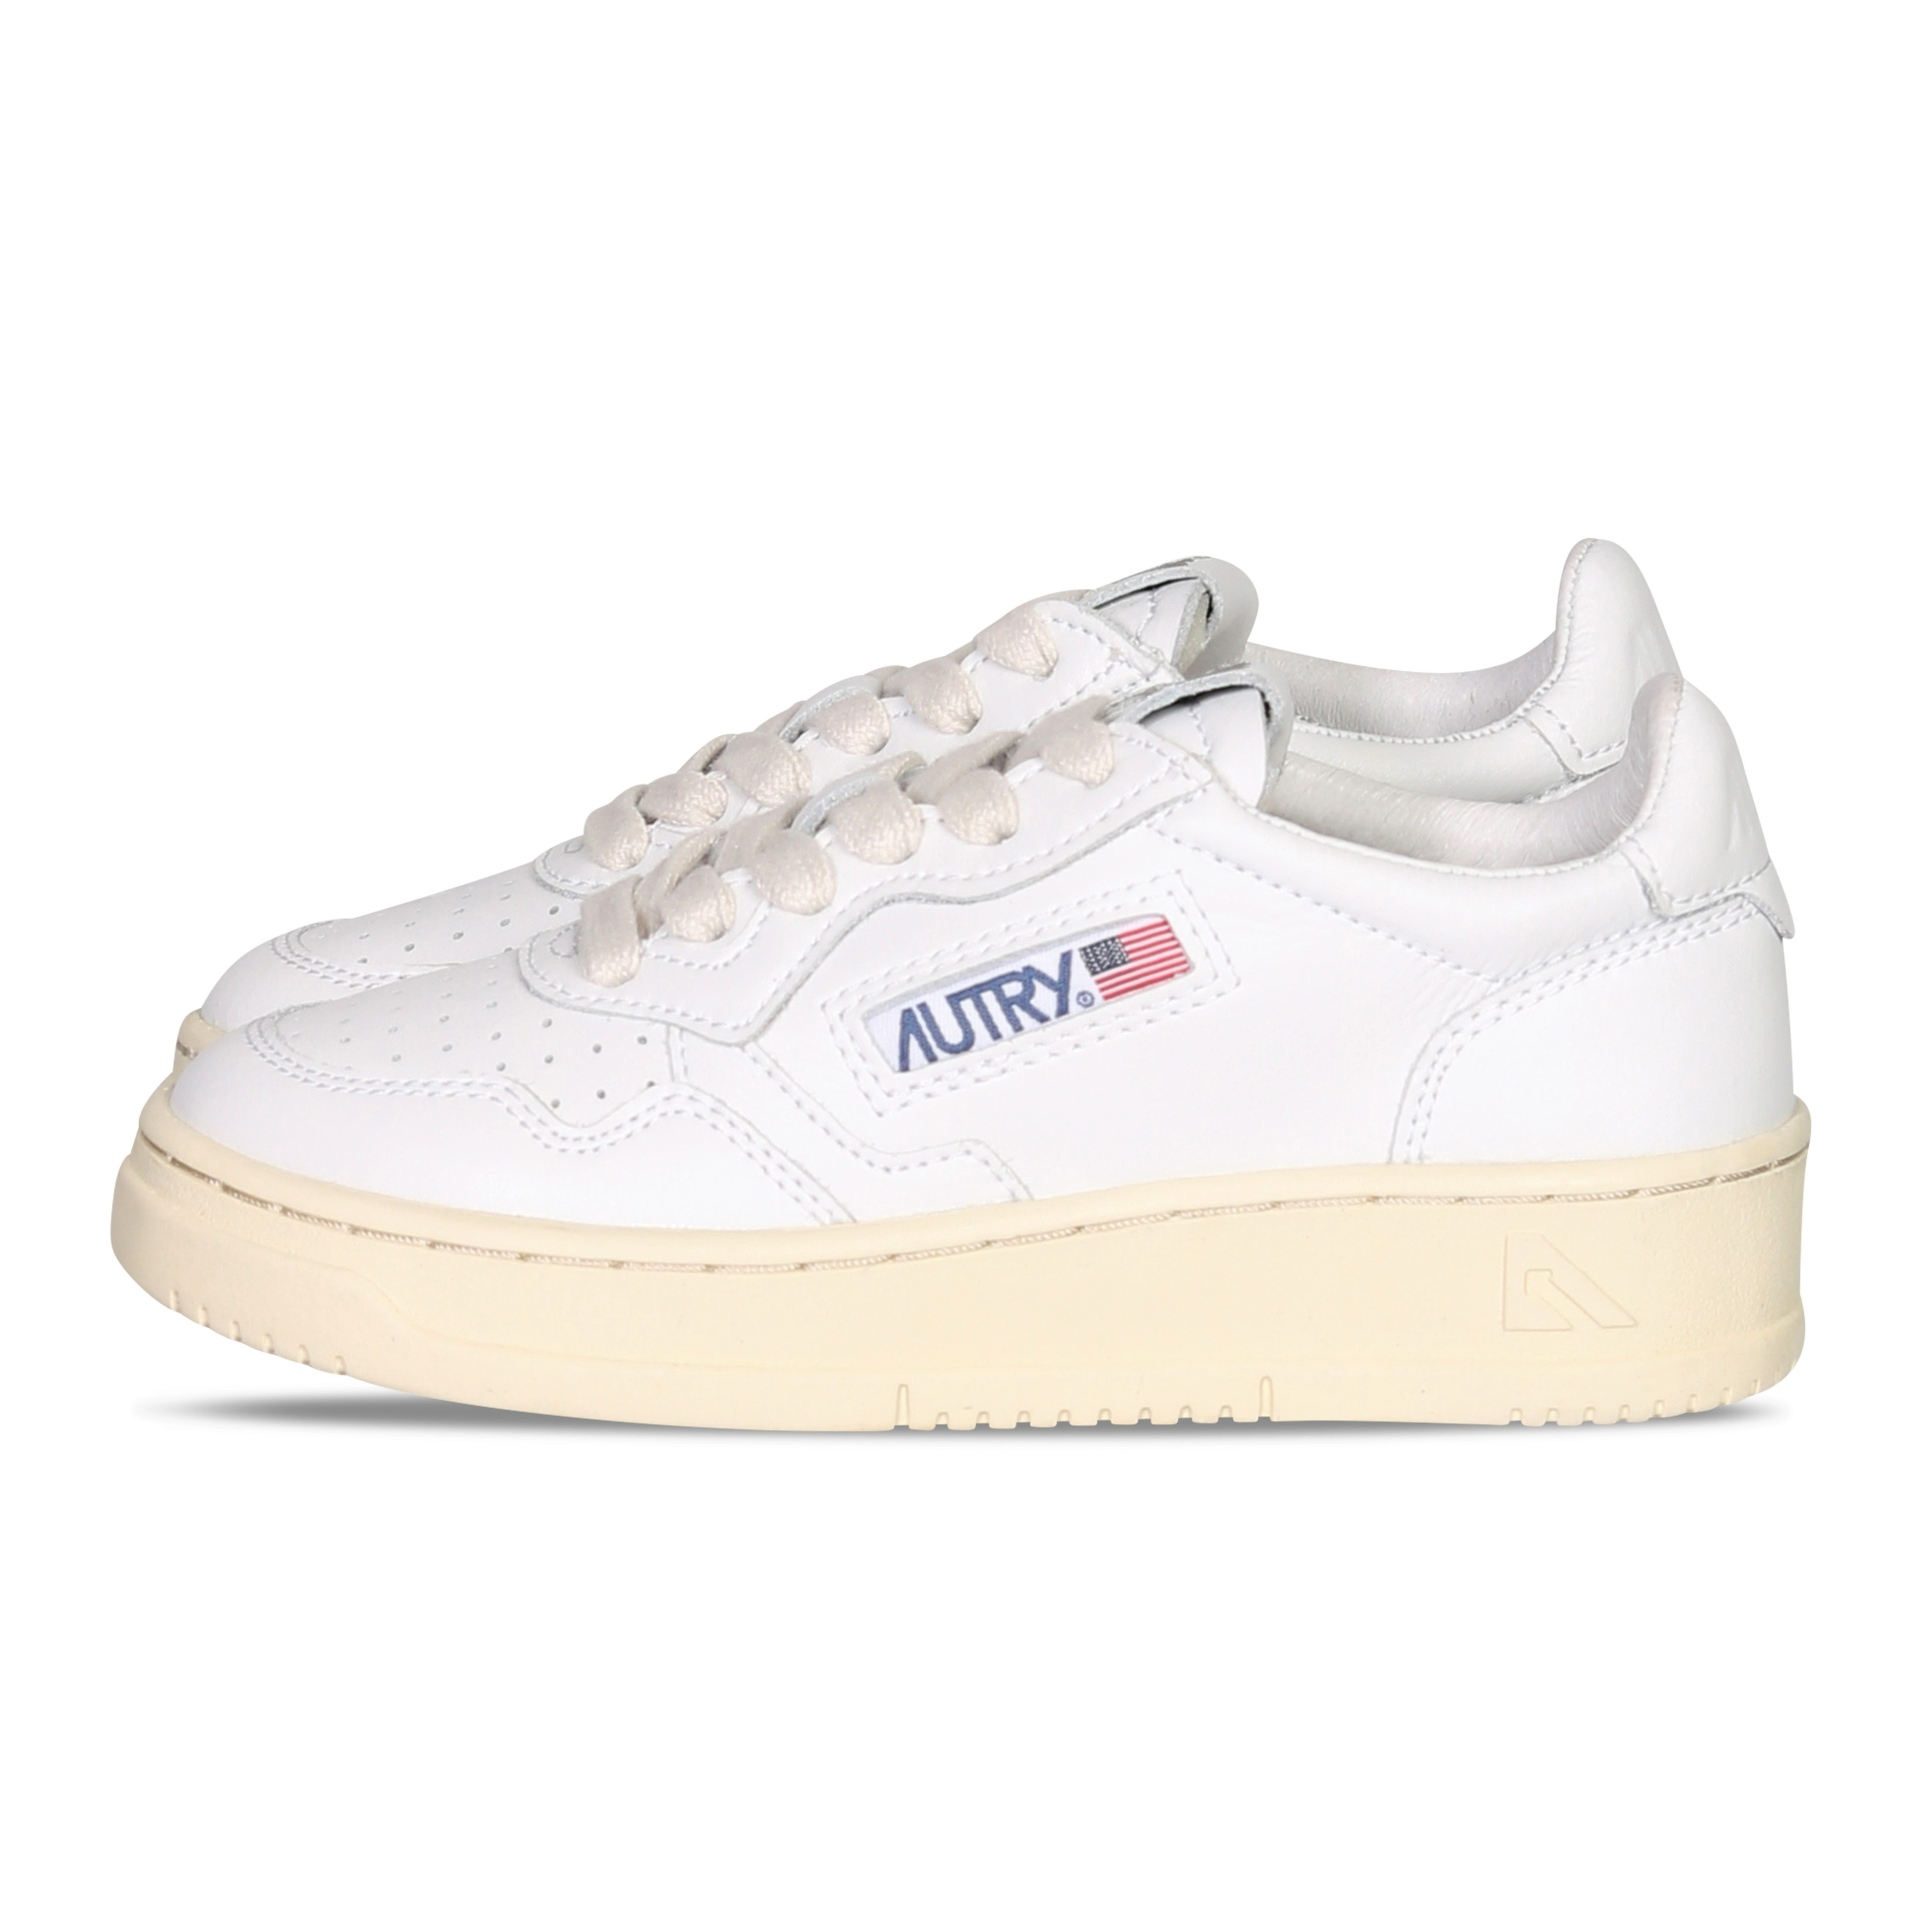 -KIDS- AUTRY ACTION SHOES Low Sneaker in White Draw Action People 28